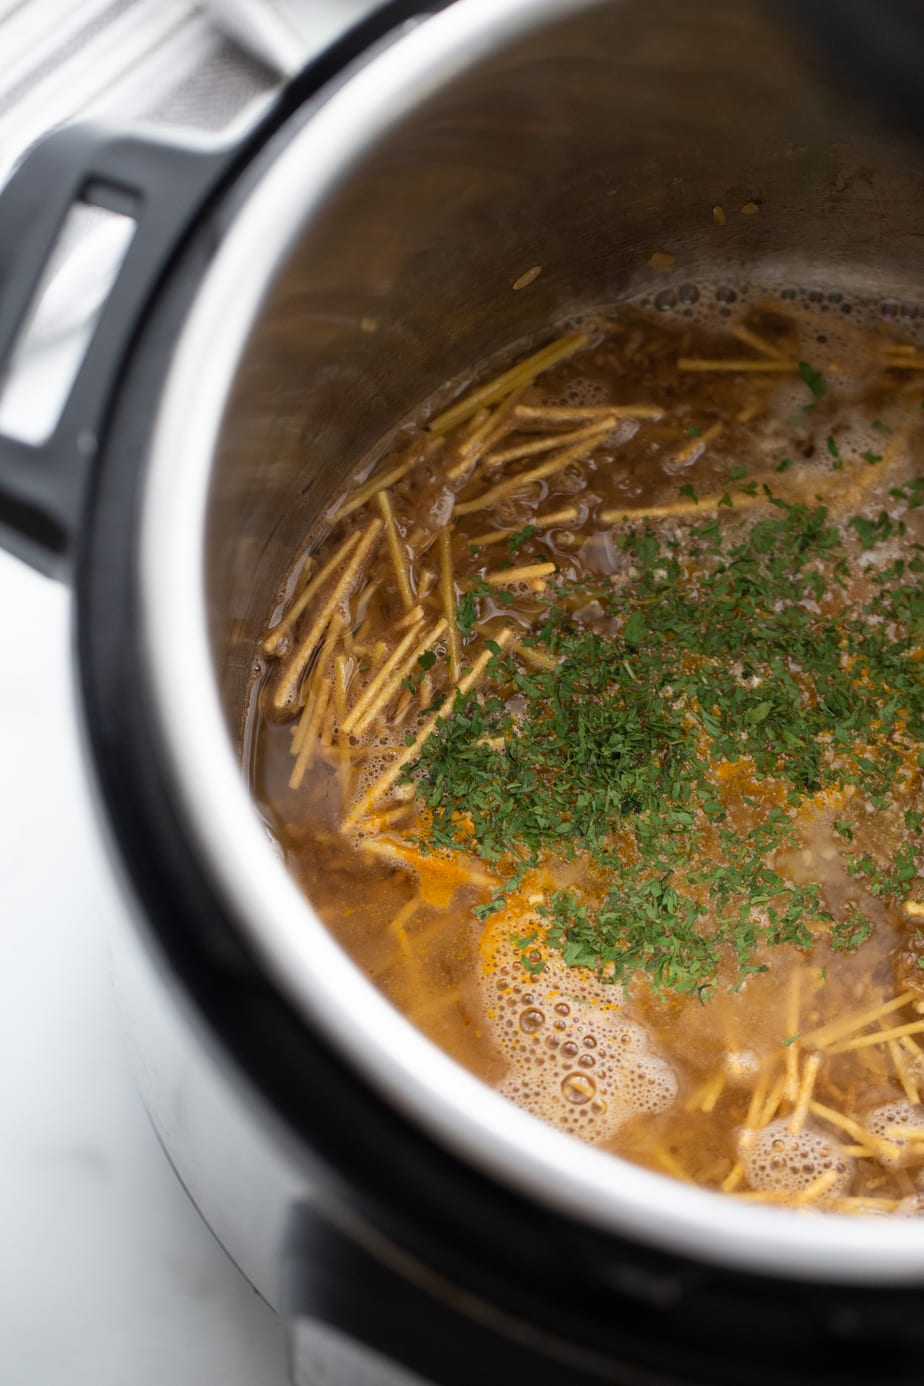 In process shot of instant pot rice a roni - rice, spaghetti, and herbs in a pot. 